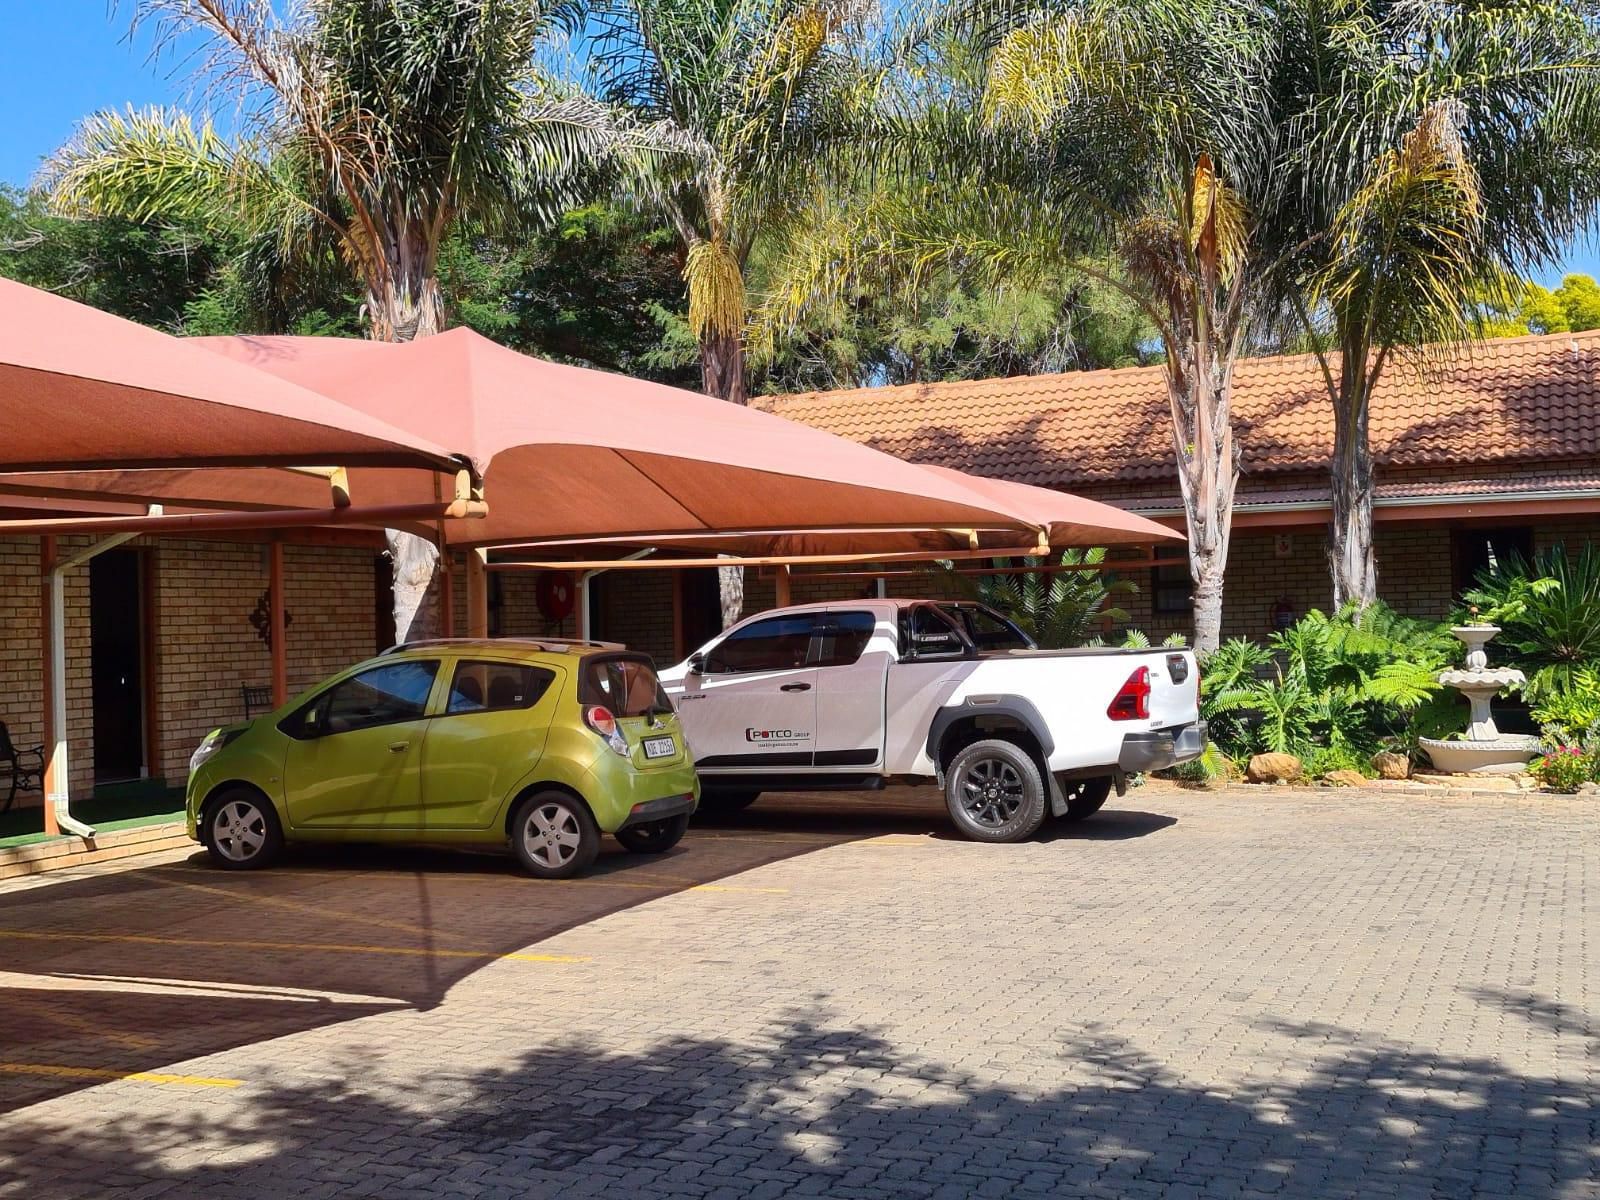 The Oval Guesthouse Dundee Kwazulu Natal South Africa Car, Vehicle, Palm Tree, Plant, Nature, Wood, Tent, Architecture